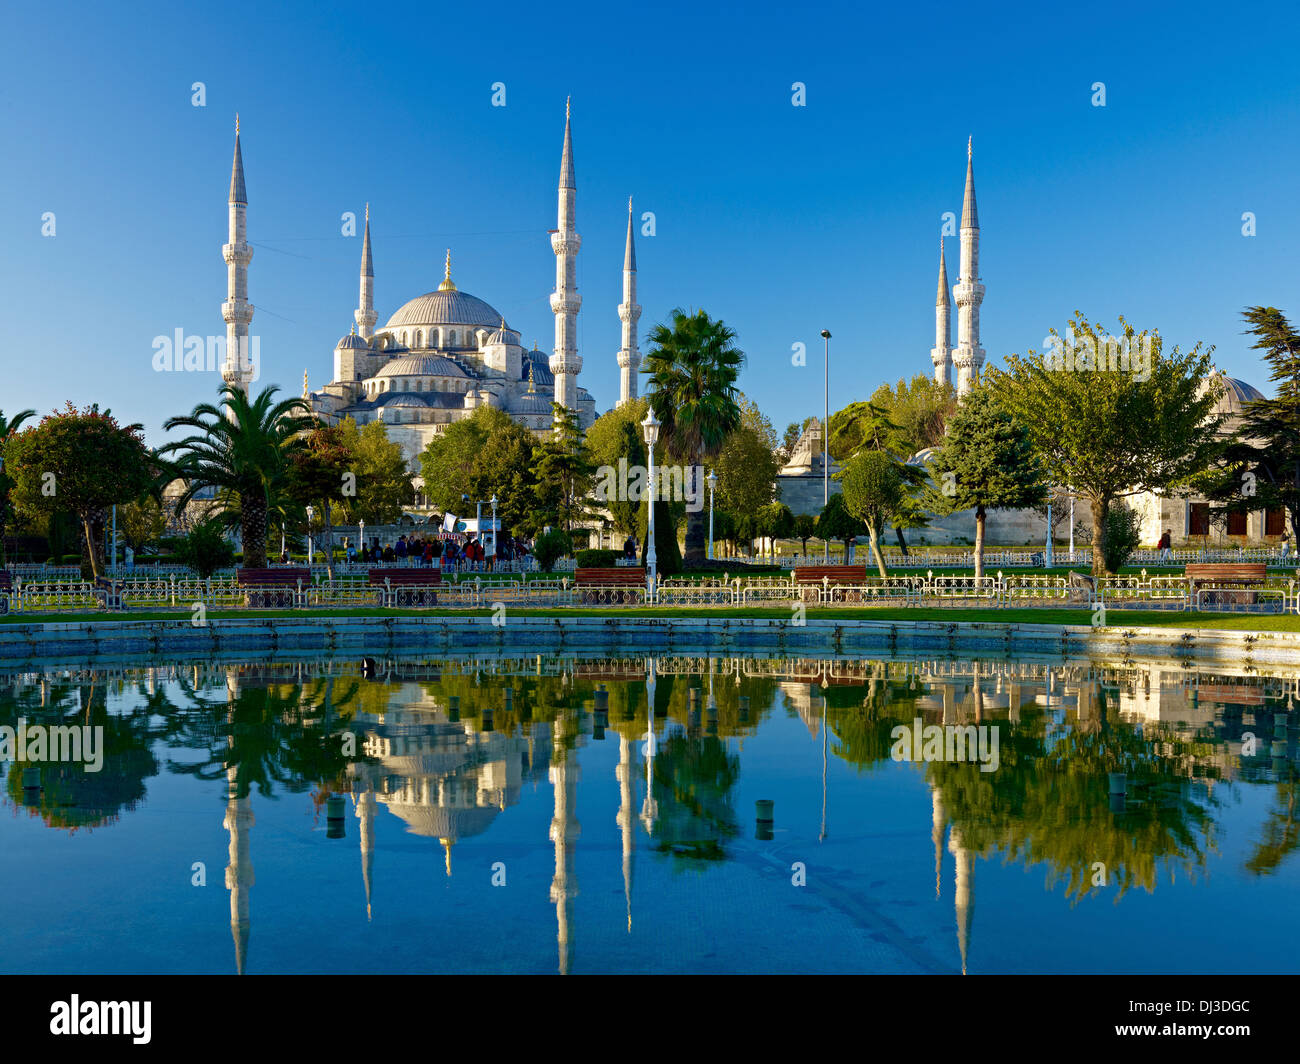 Sultan Ahmed Mosque, Blue Mosque, Istanbul, Turkey Stock Photo